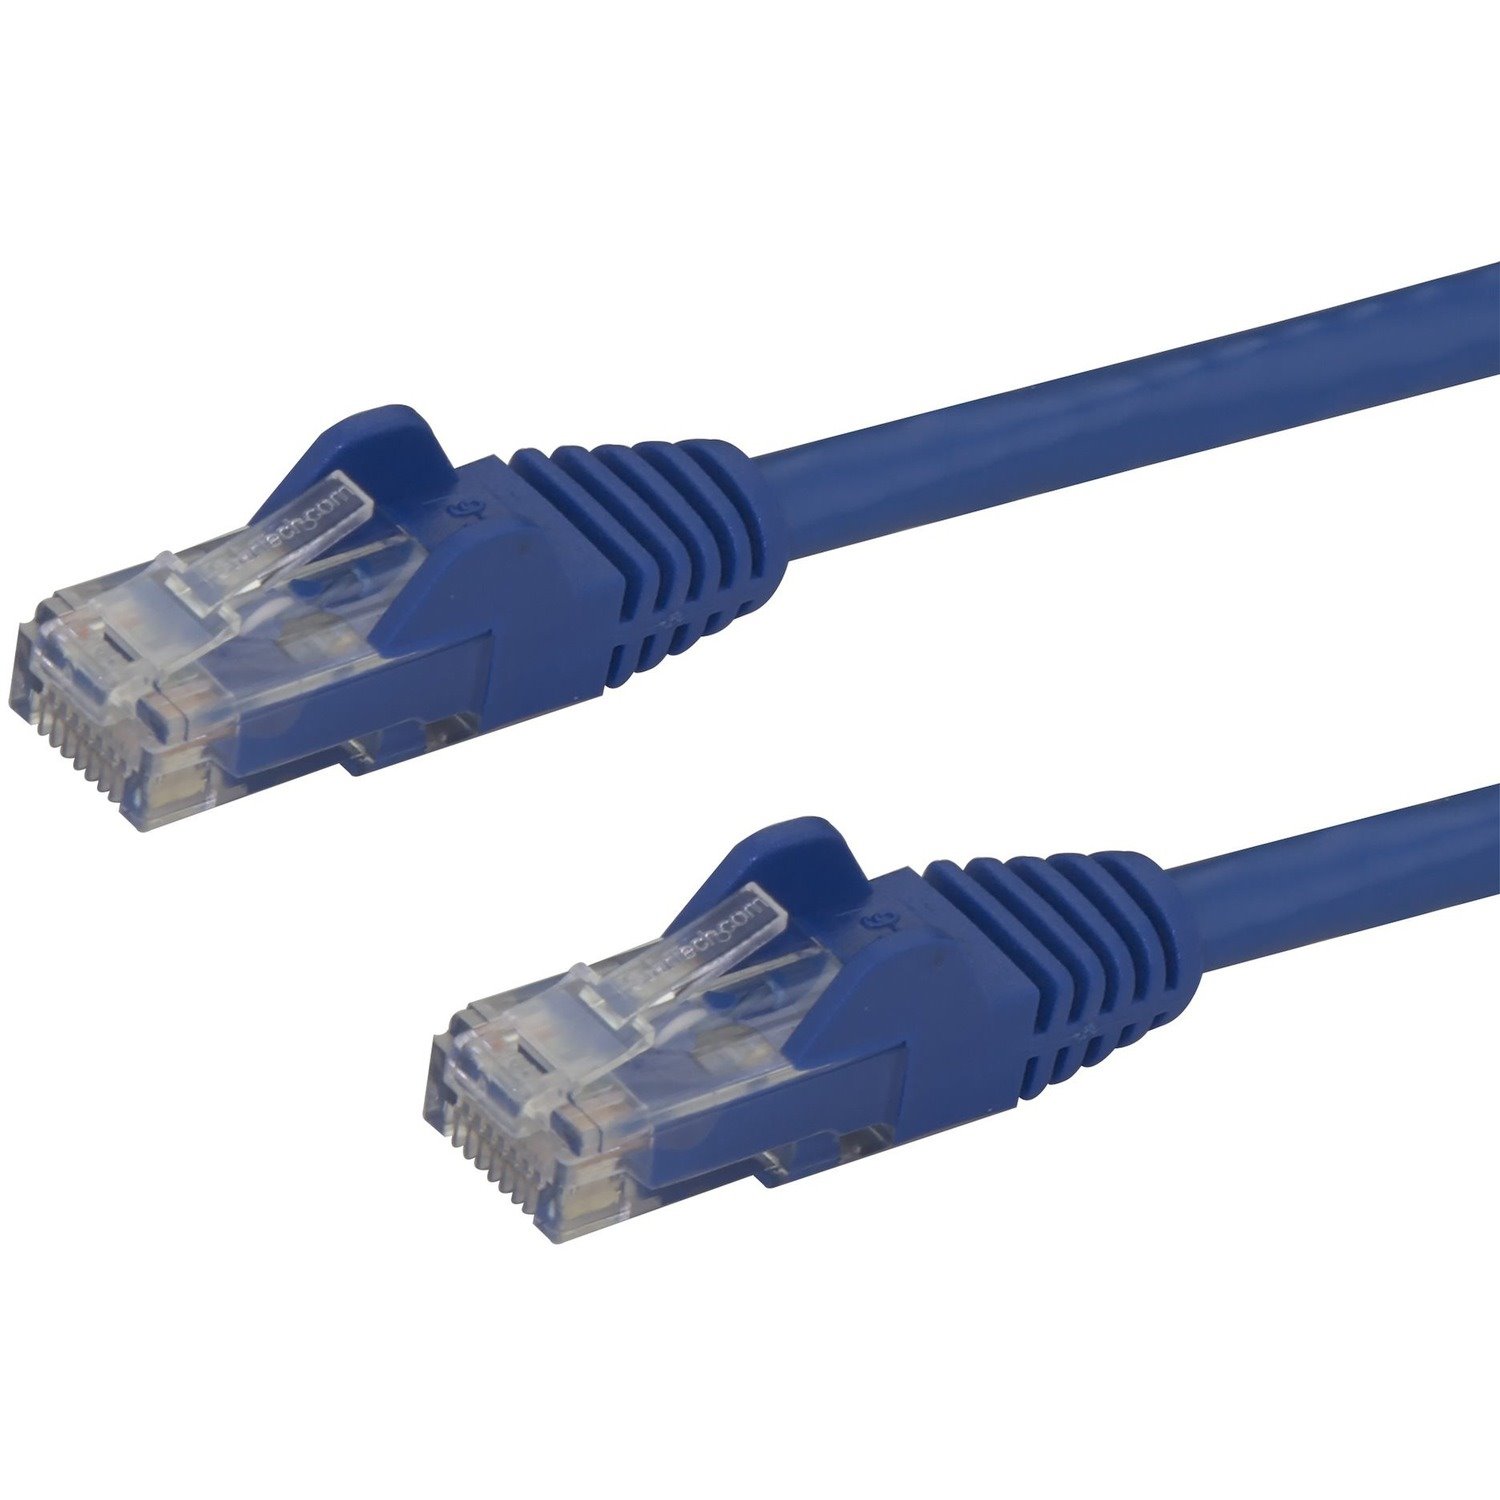 StarTech.com 10 m Category 6 Network Cable for Network Device, Hub, Distribution Panel, Workstation, Wall Outlet, IP Phone - 1